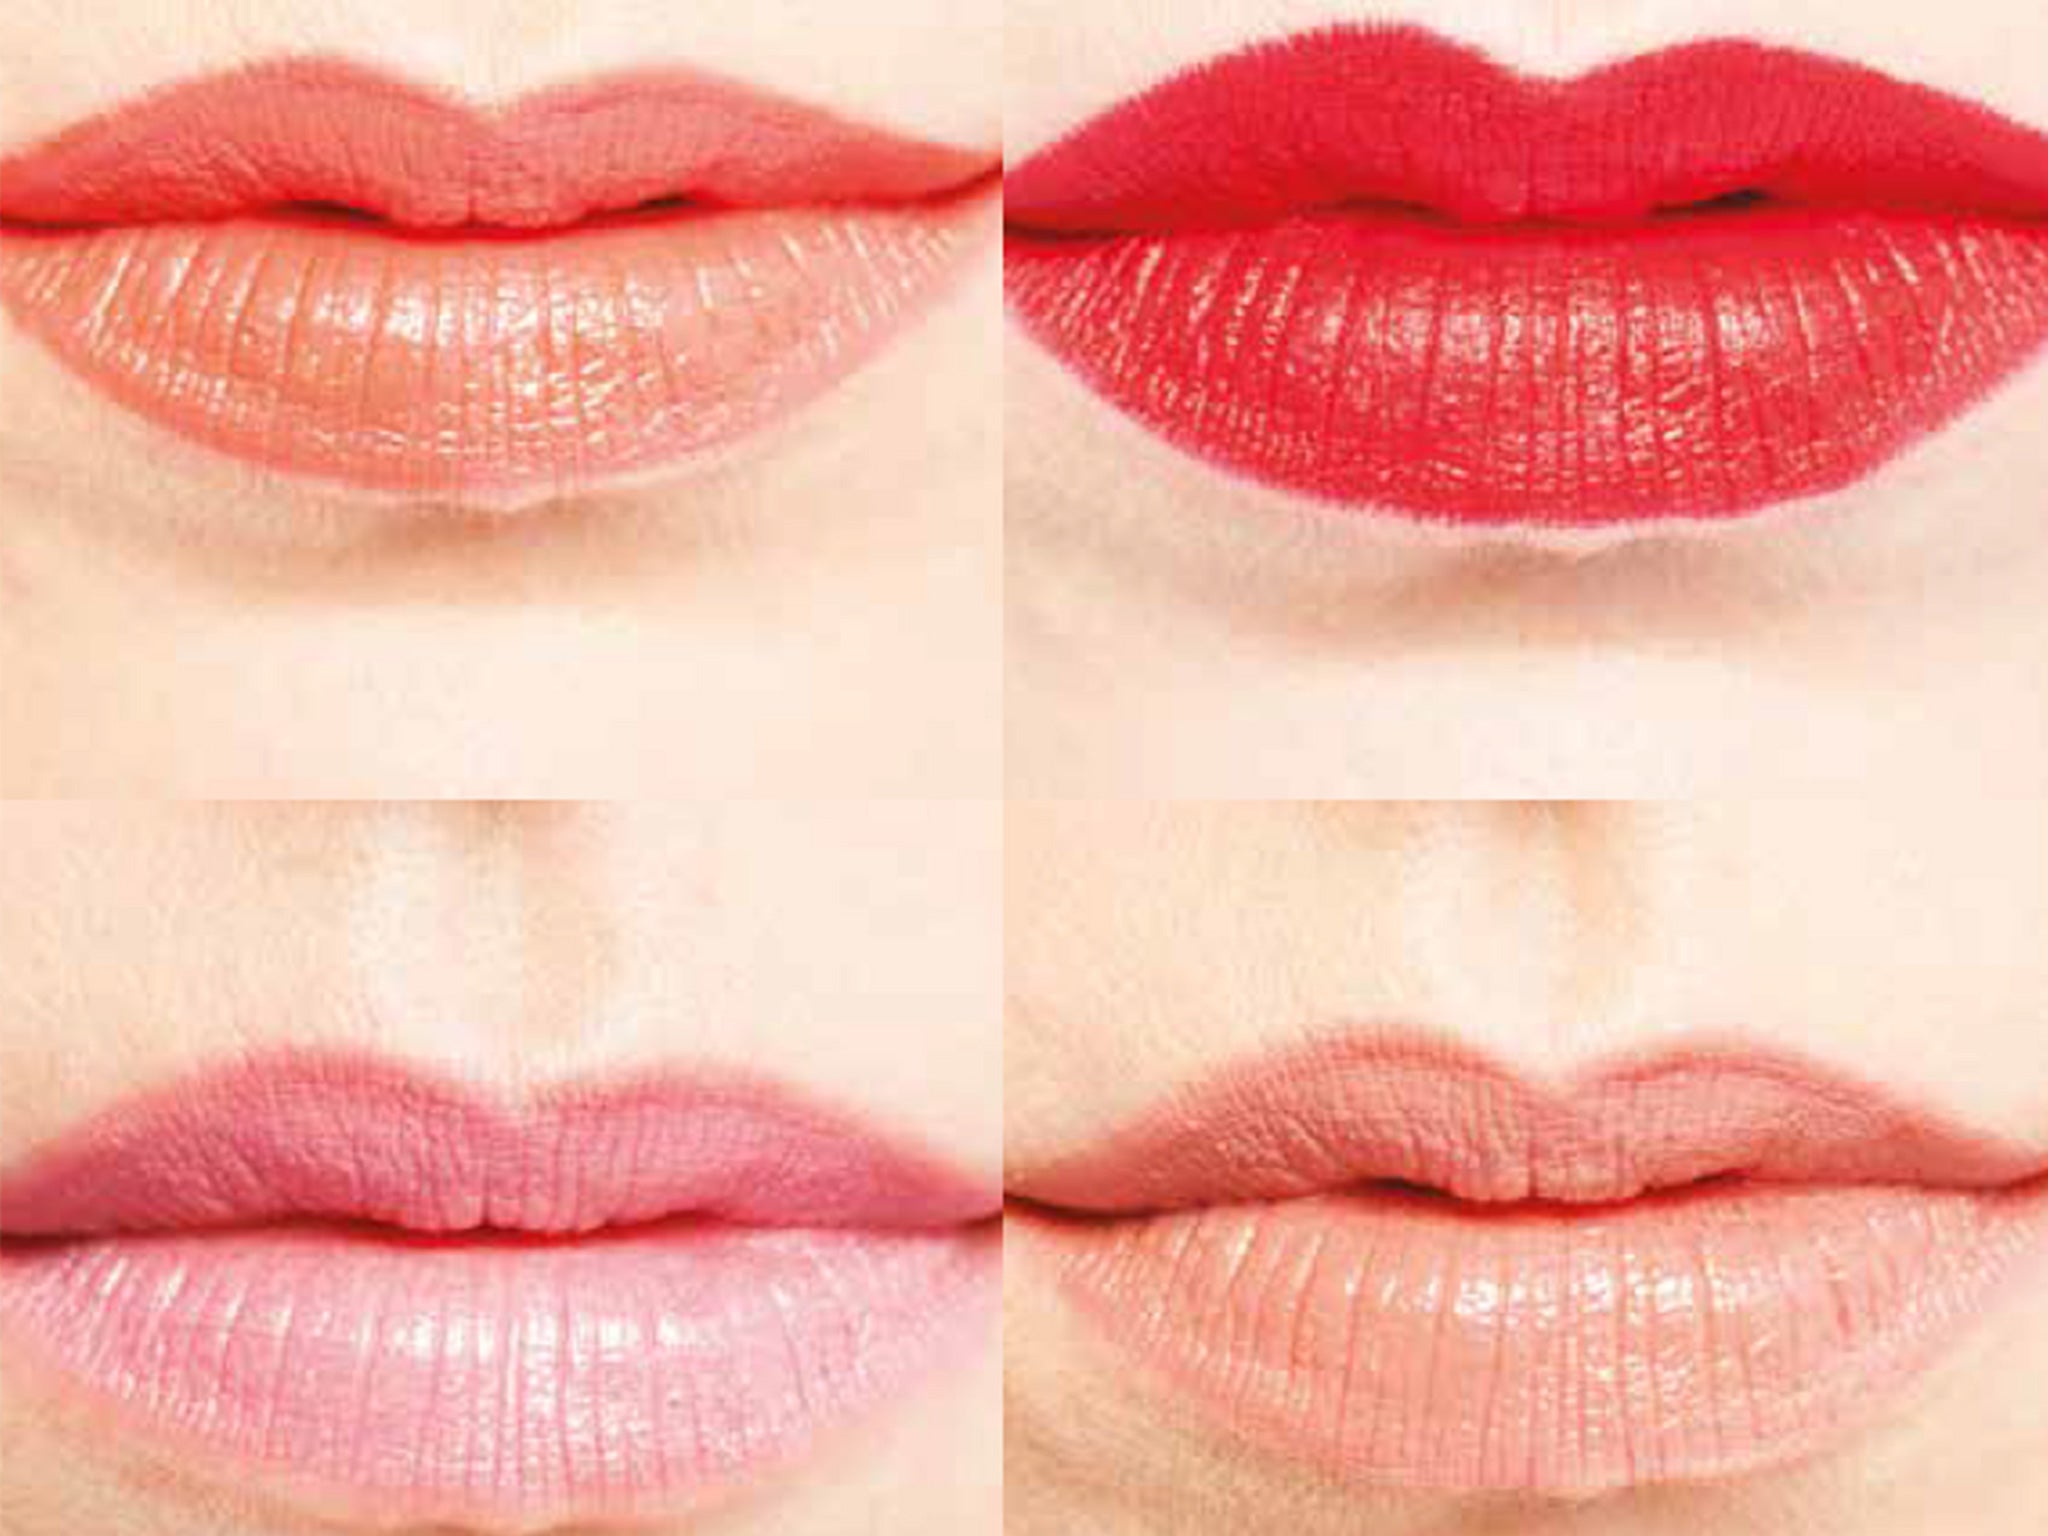 The world's most popular lipsticks revealed and include caramel nude, bright red, dusky rose and sheer coral.